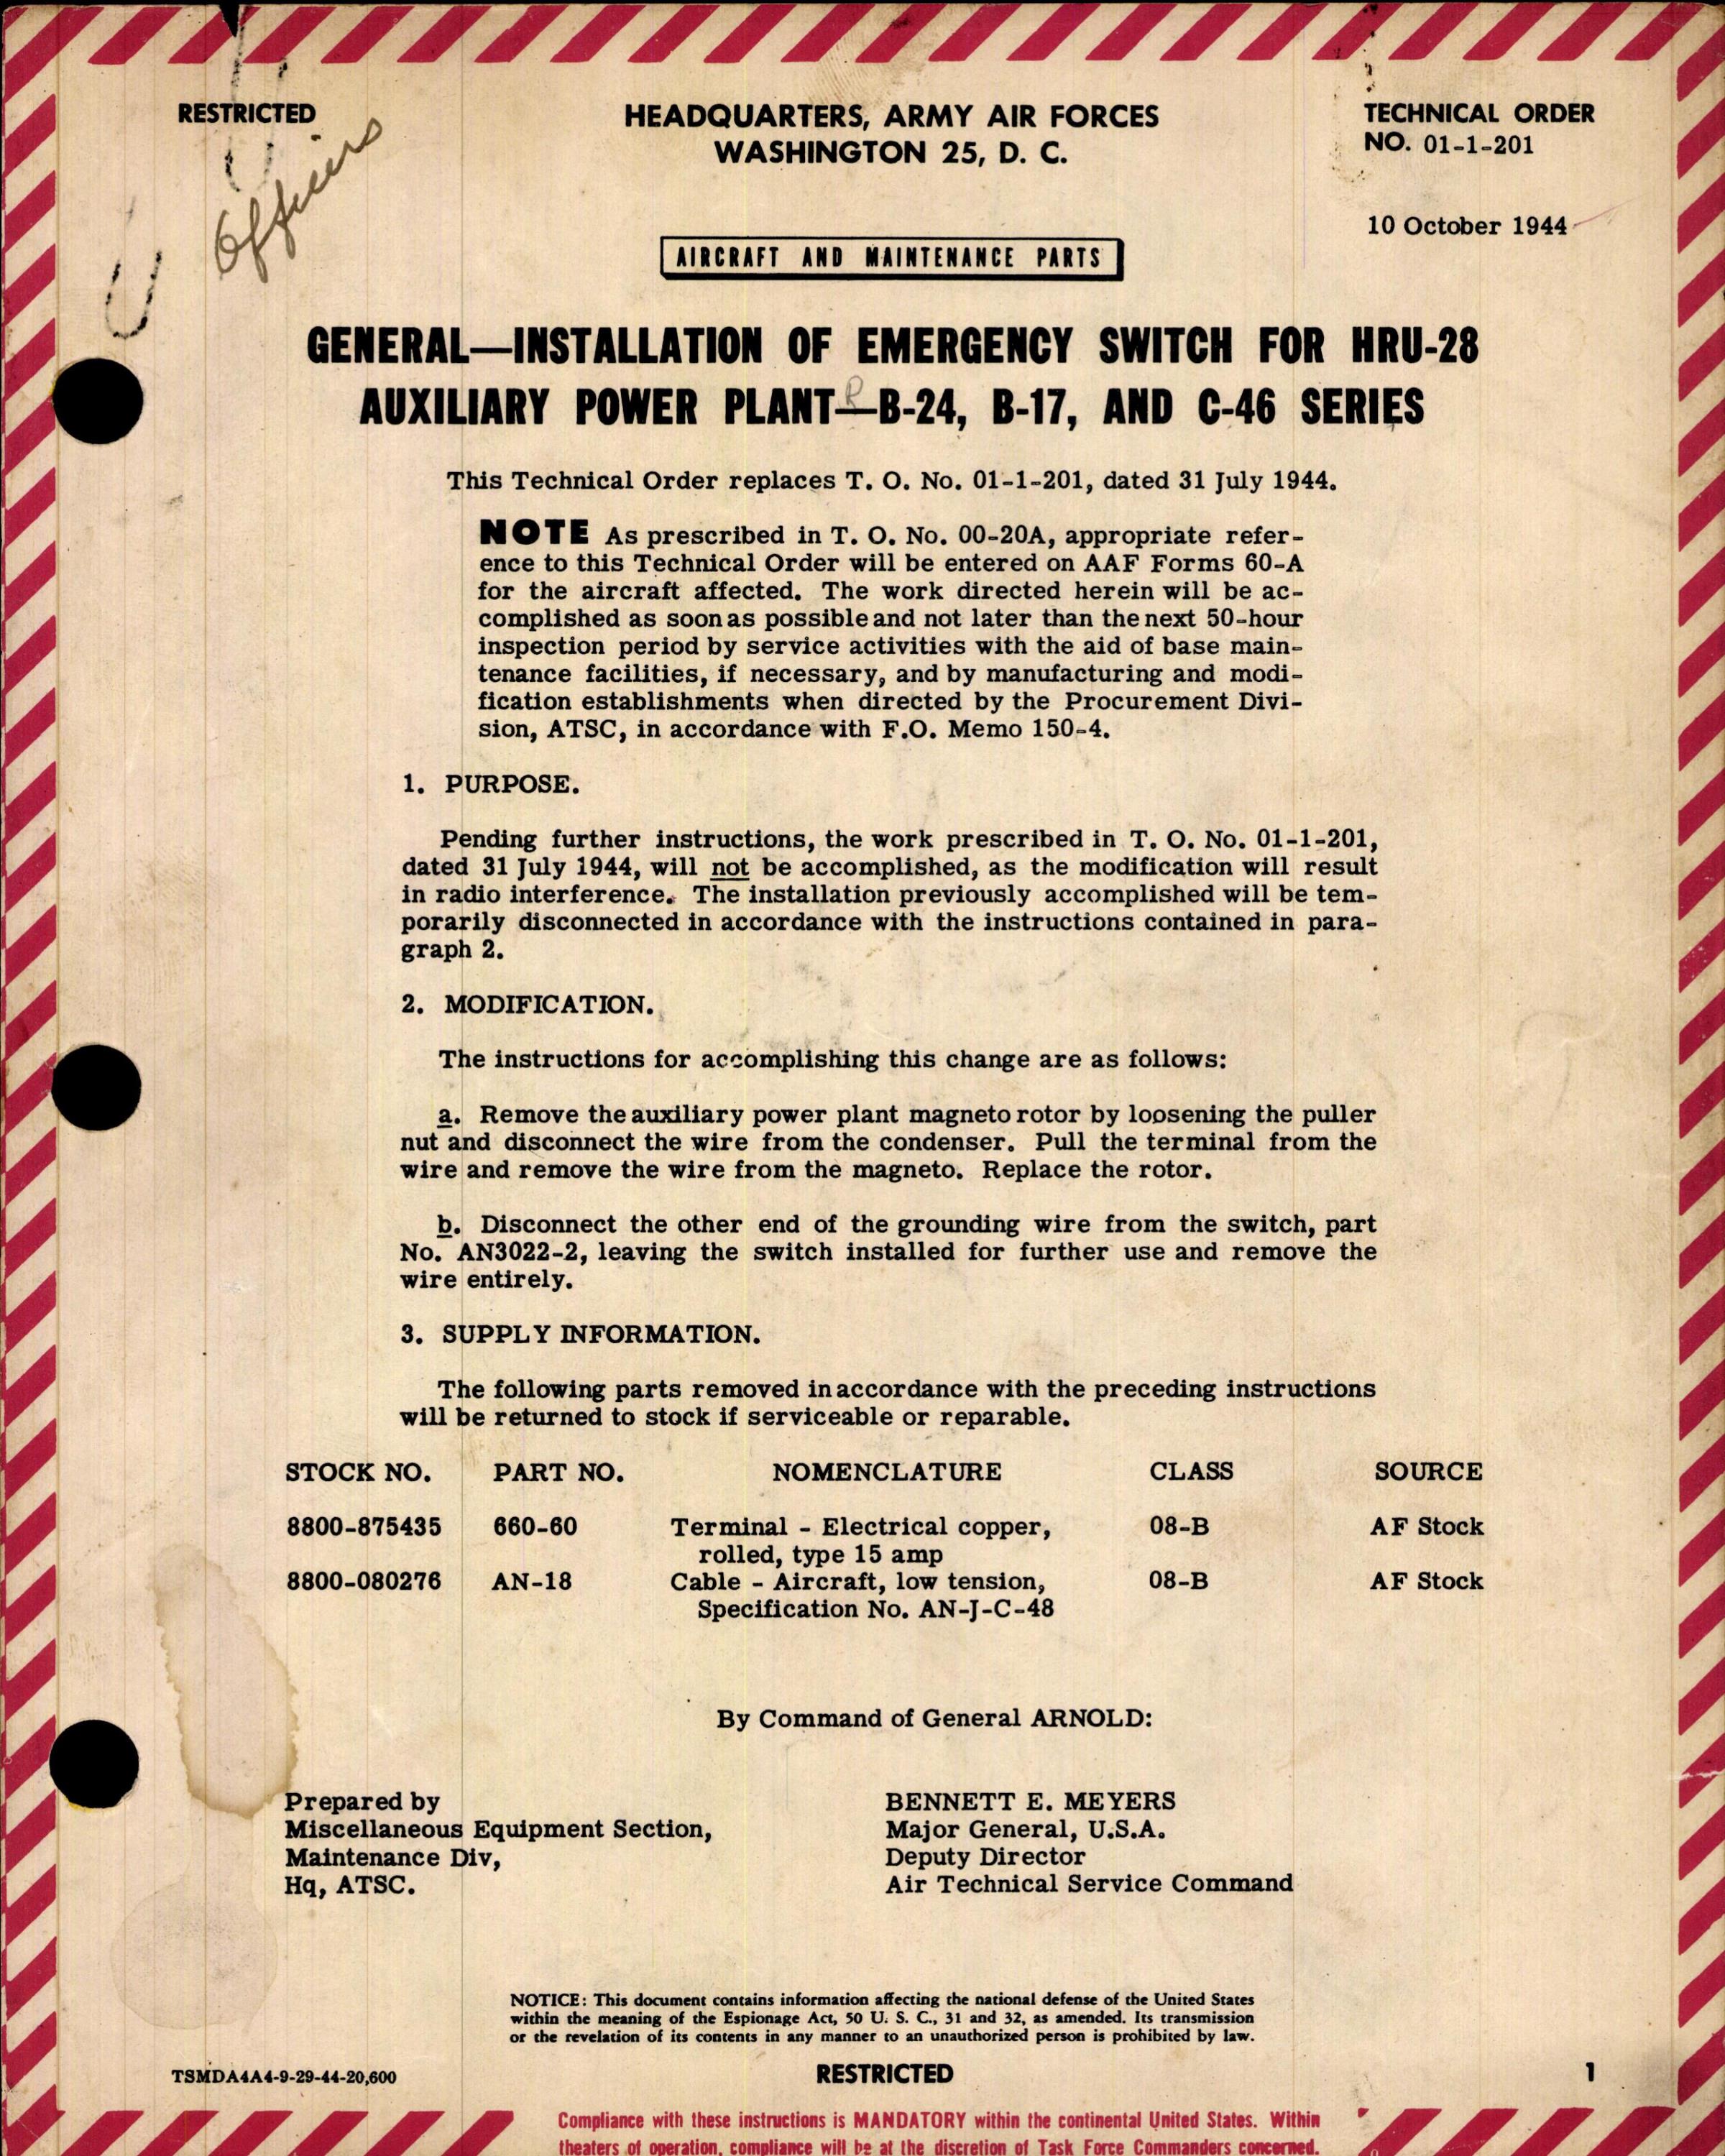 Sample page 1 from AirCorps Library document: Installation of Emergency Switch for Auxiliary Power Plant